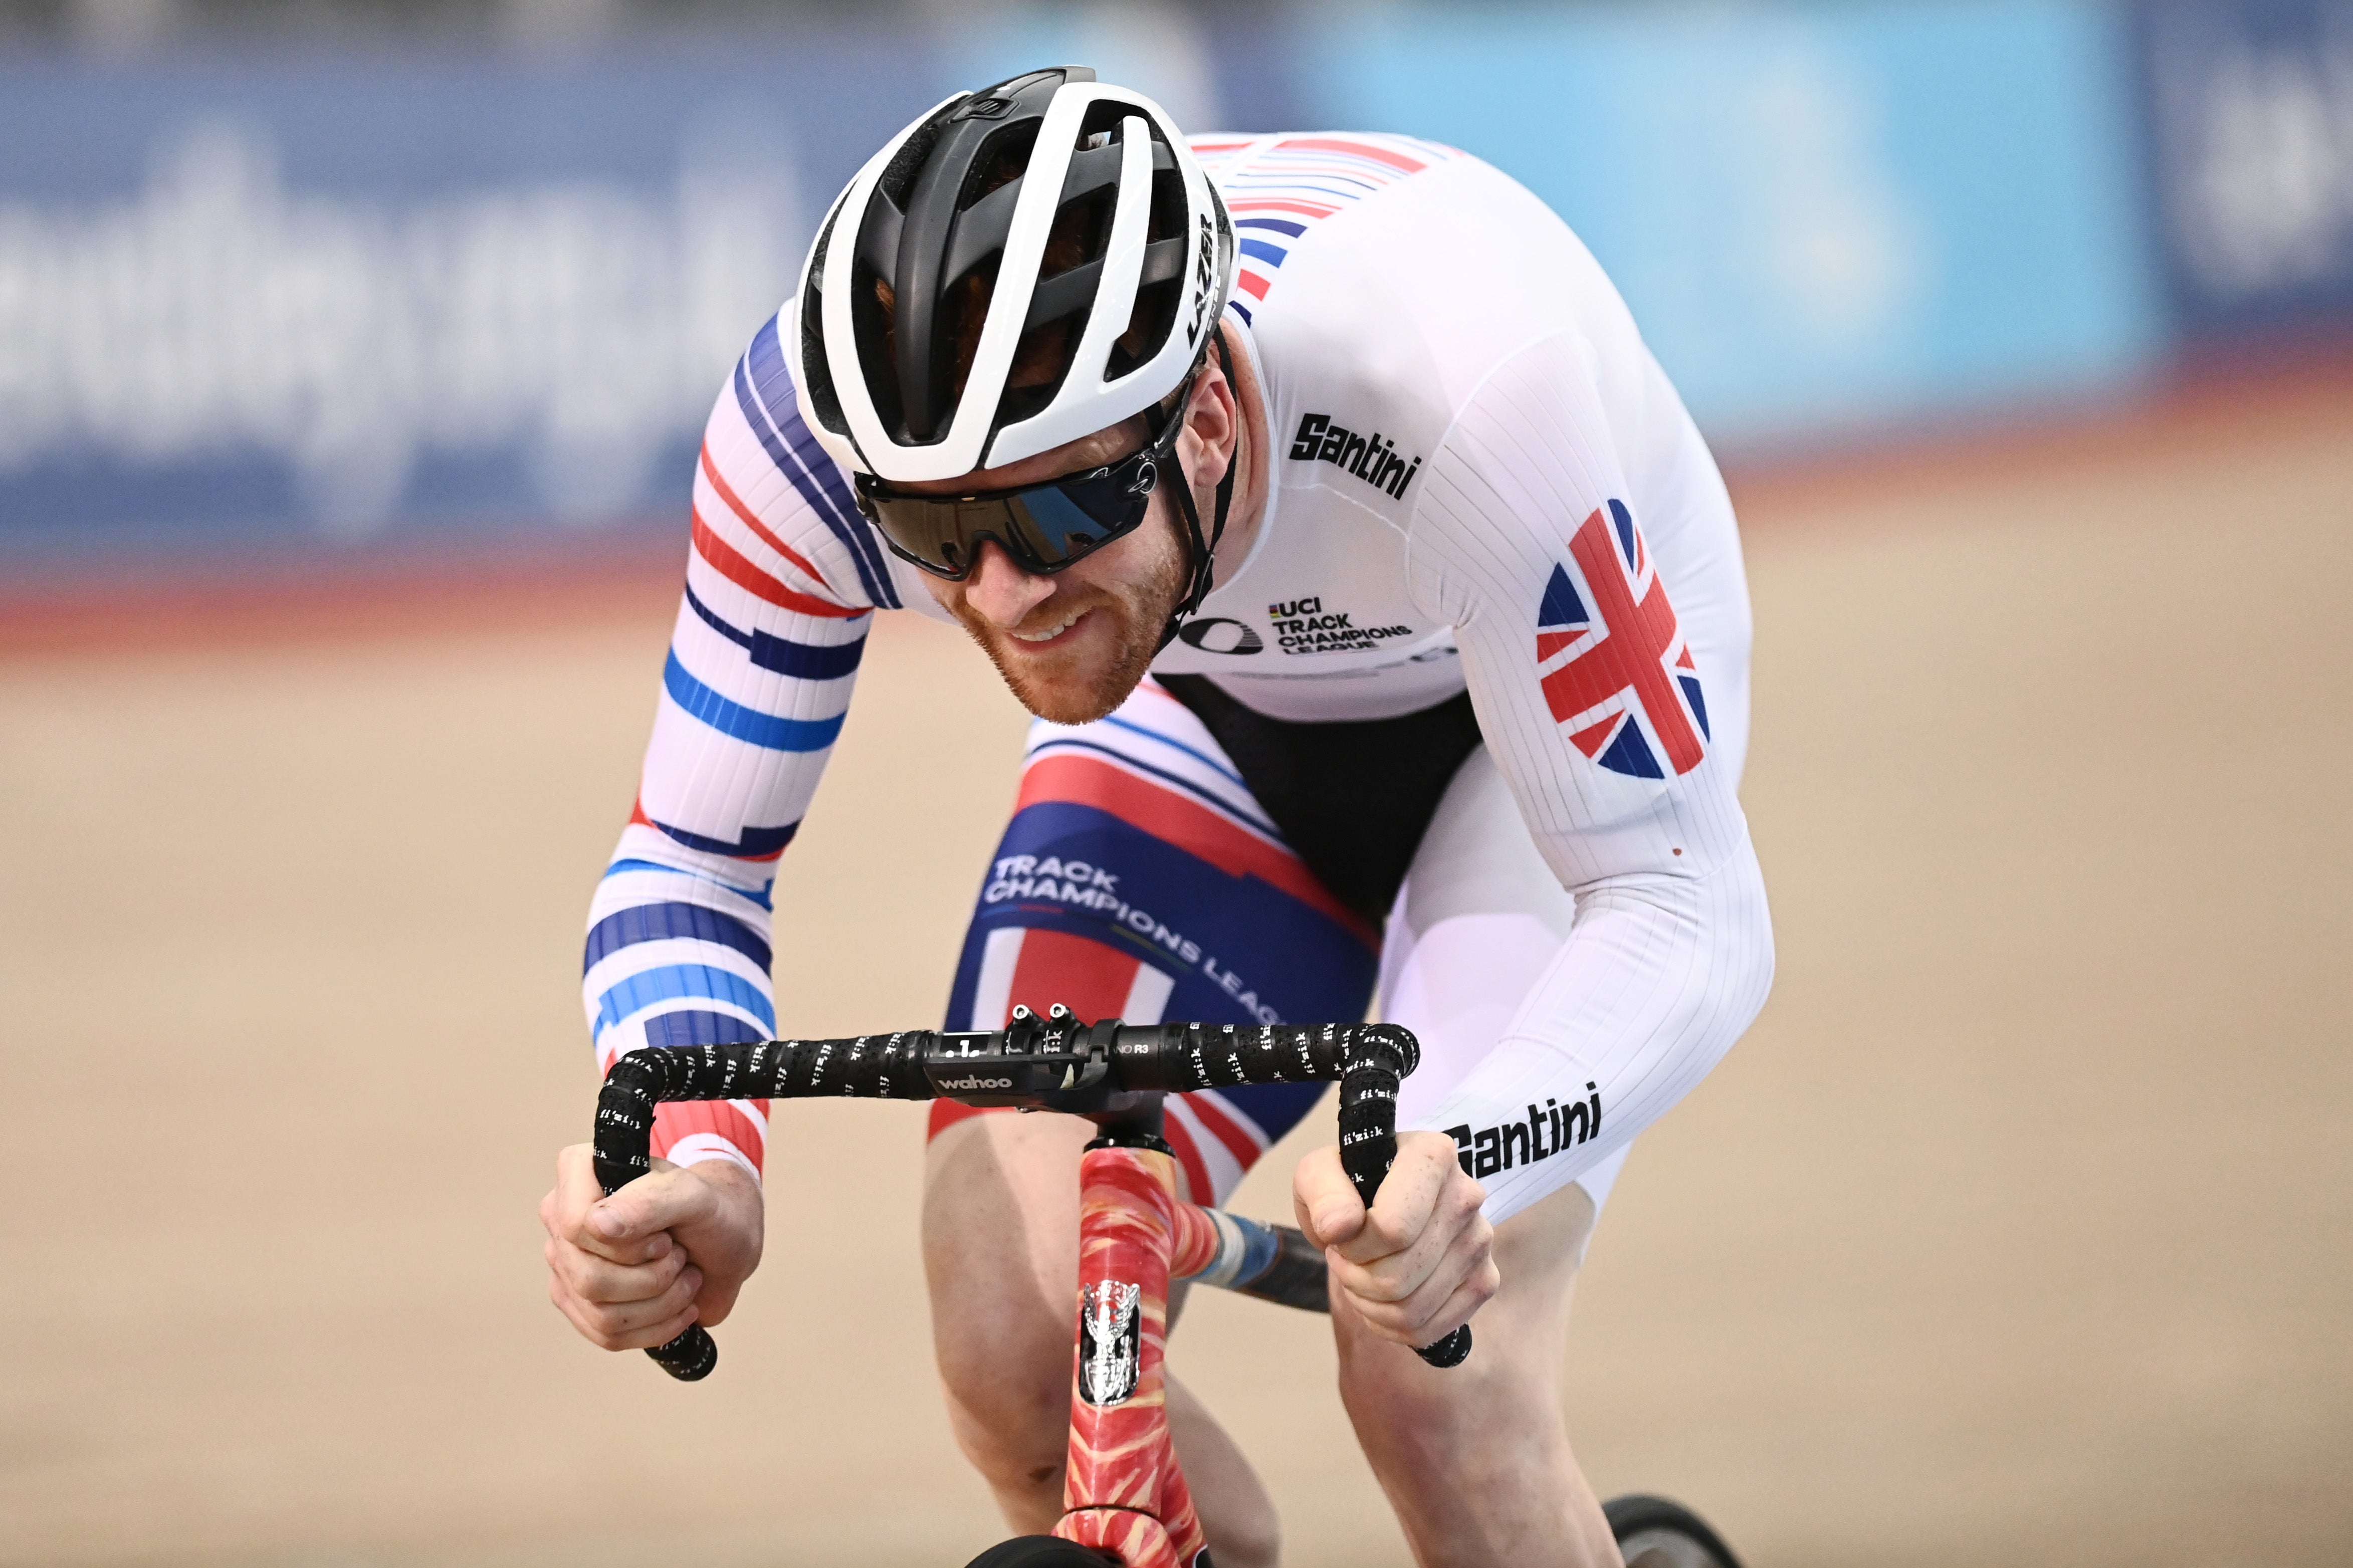 Ed Clancy will race in the new event before retirement (Alex Broadway/UCI handout)